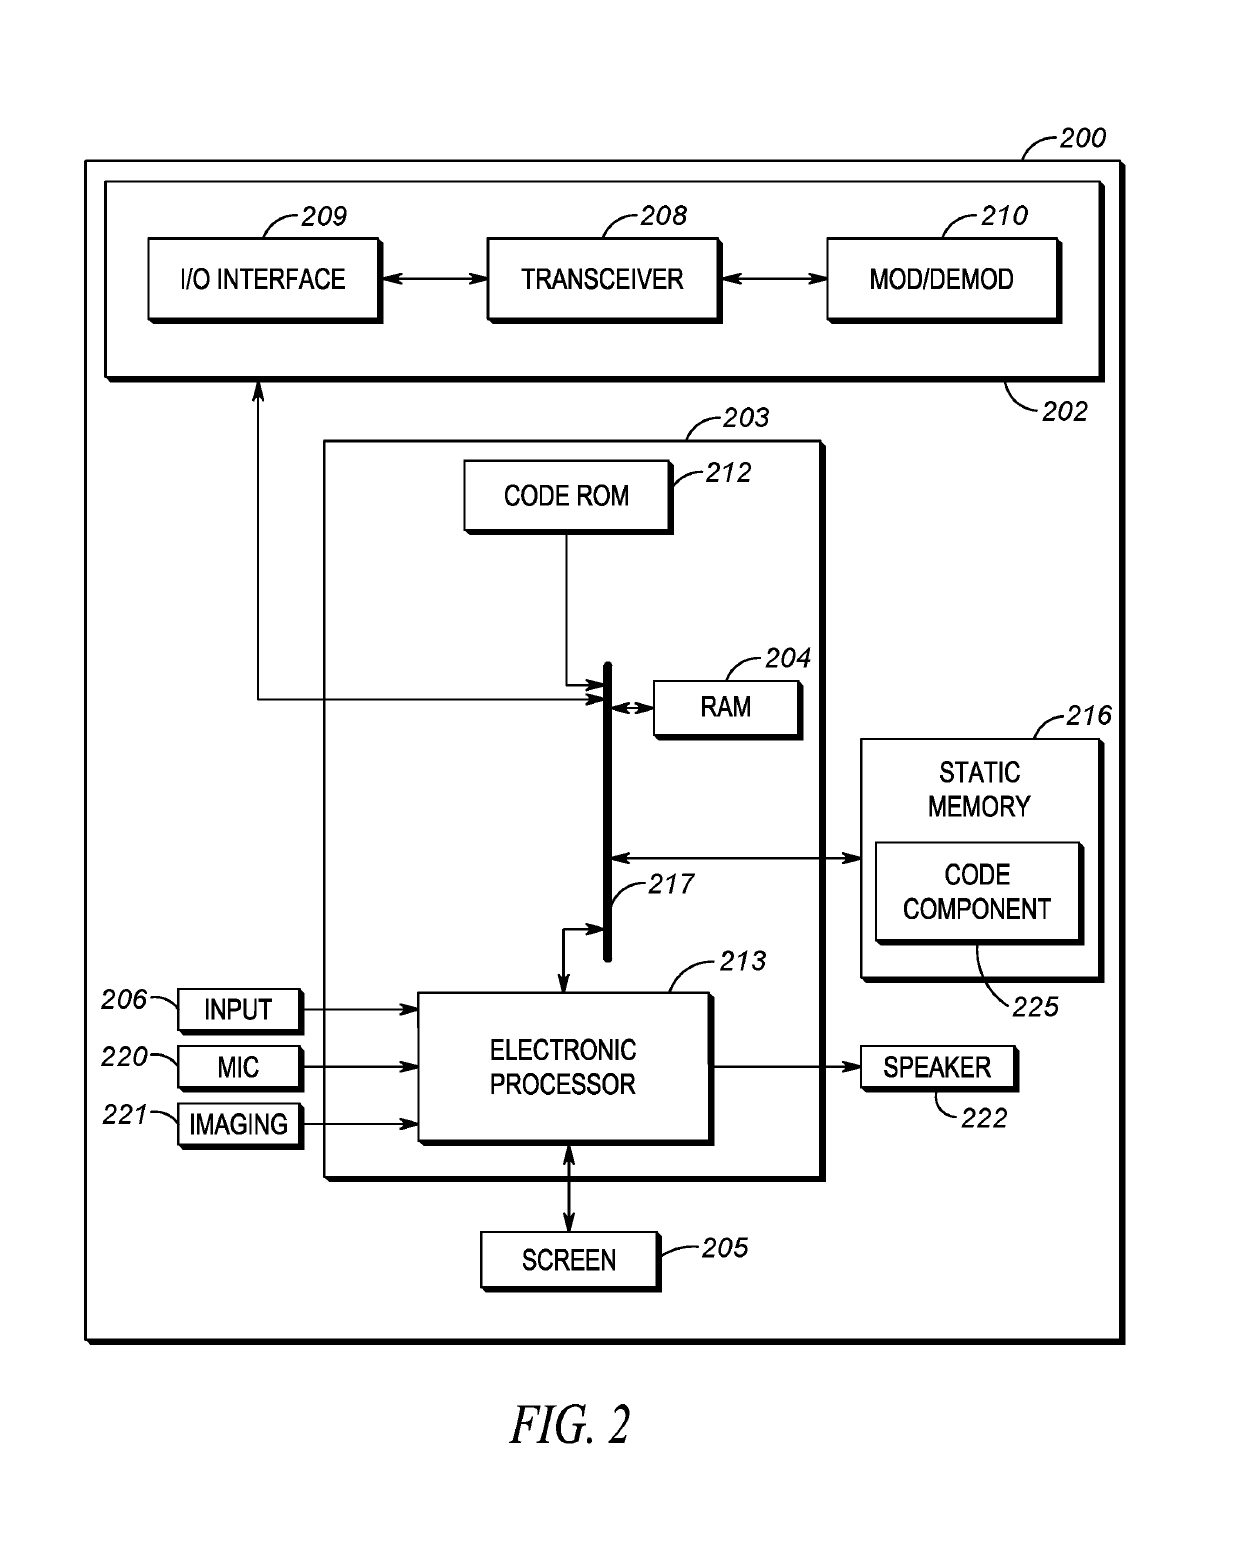 Method, device, and system for adaptive training of machine learning models via detected in-field contextual sensor events and associated located and retrieved digital audio and/or video imaging